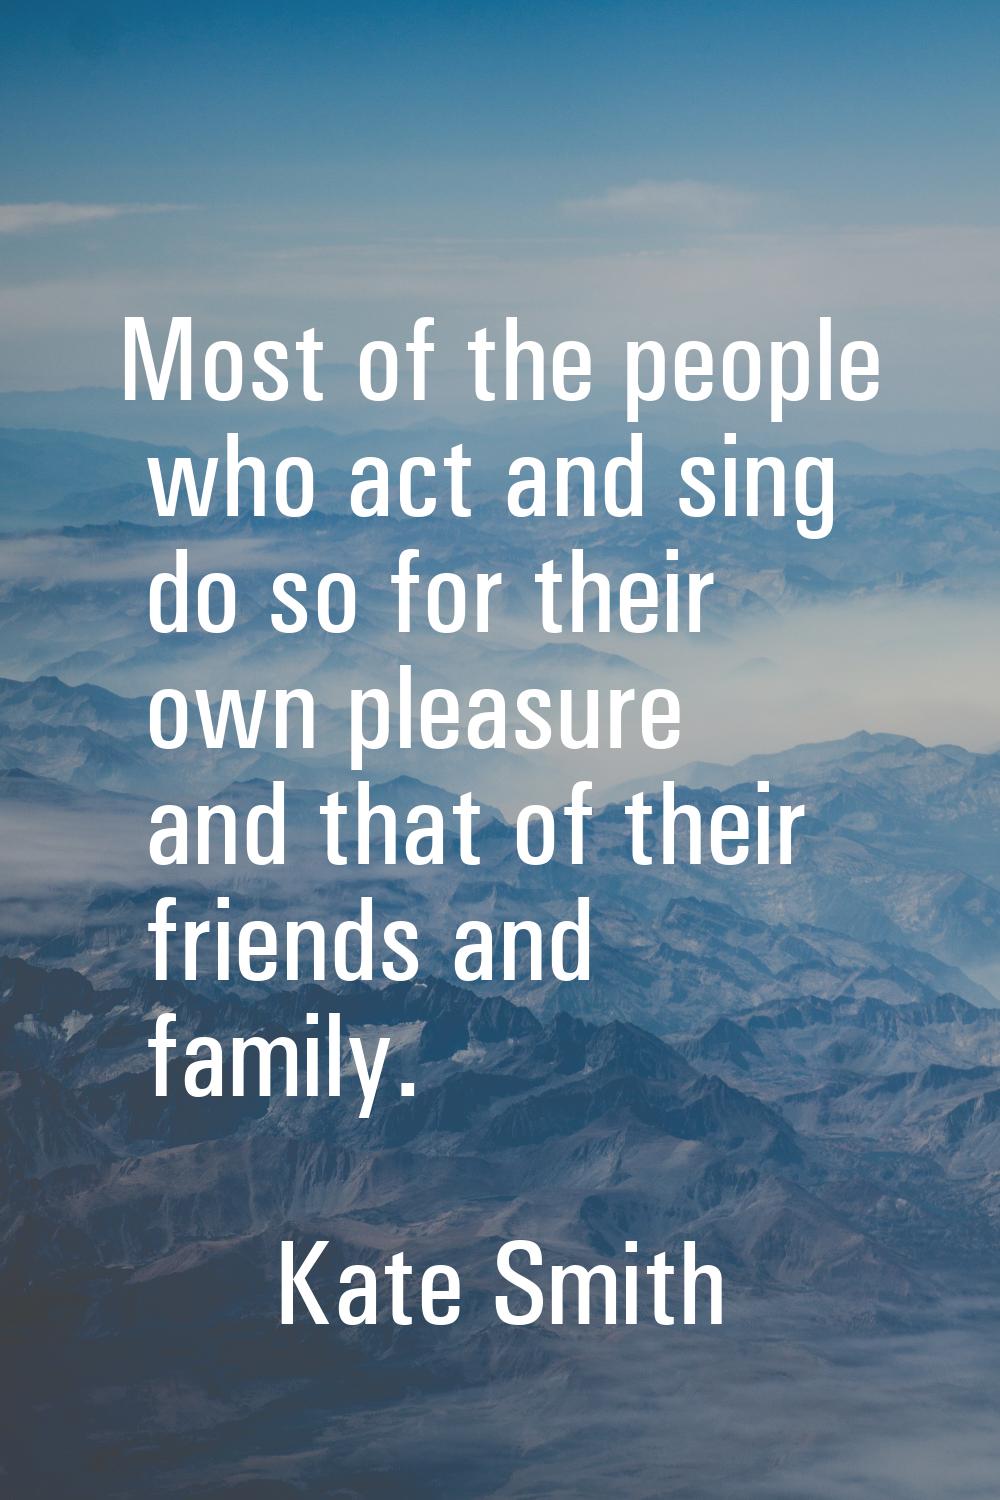 Most of the people who act and sing do so for their own pleasure and that of their friends and fami